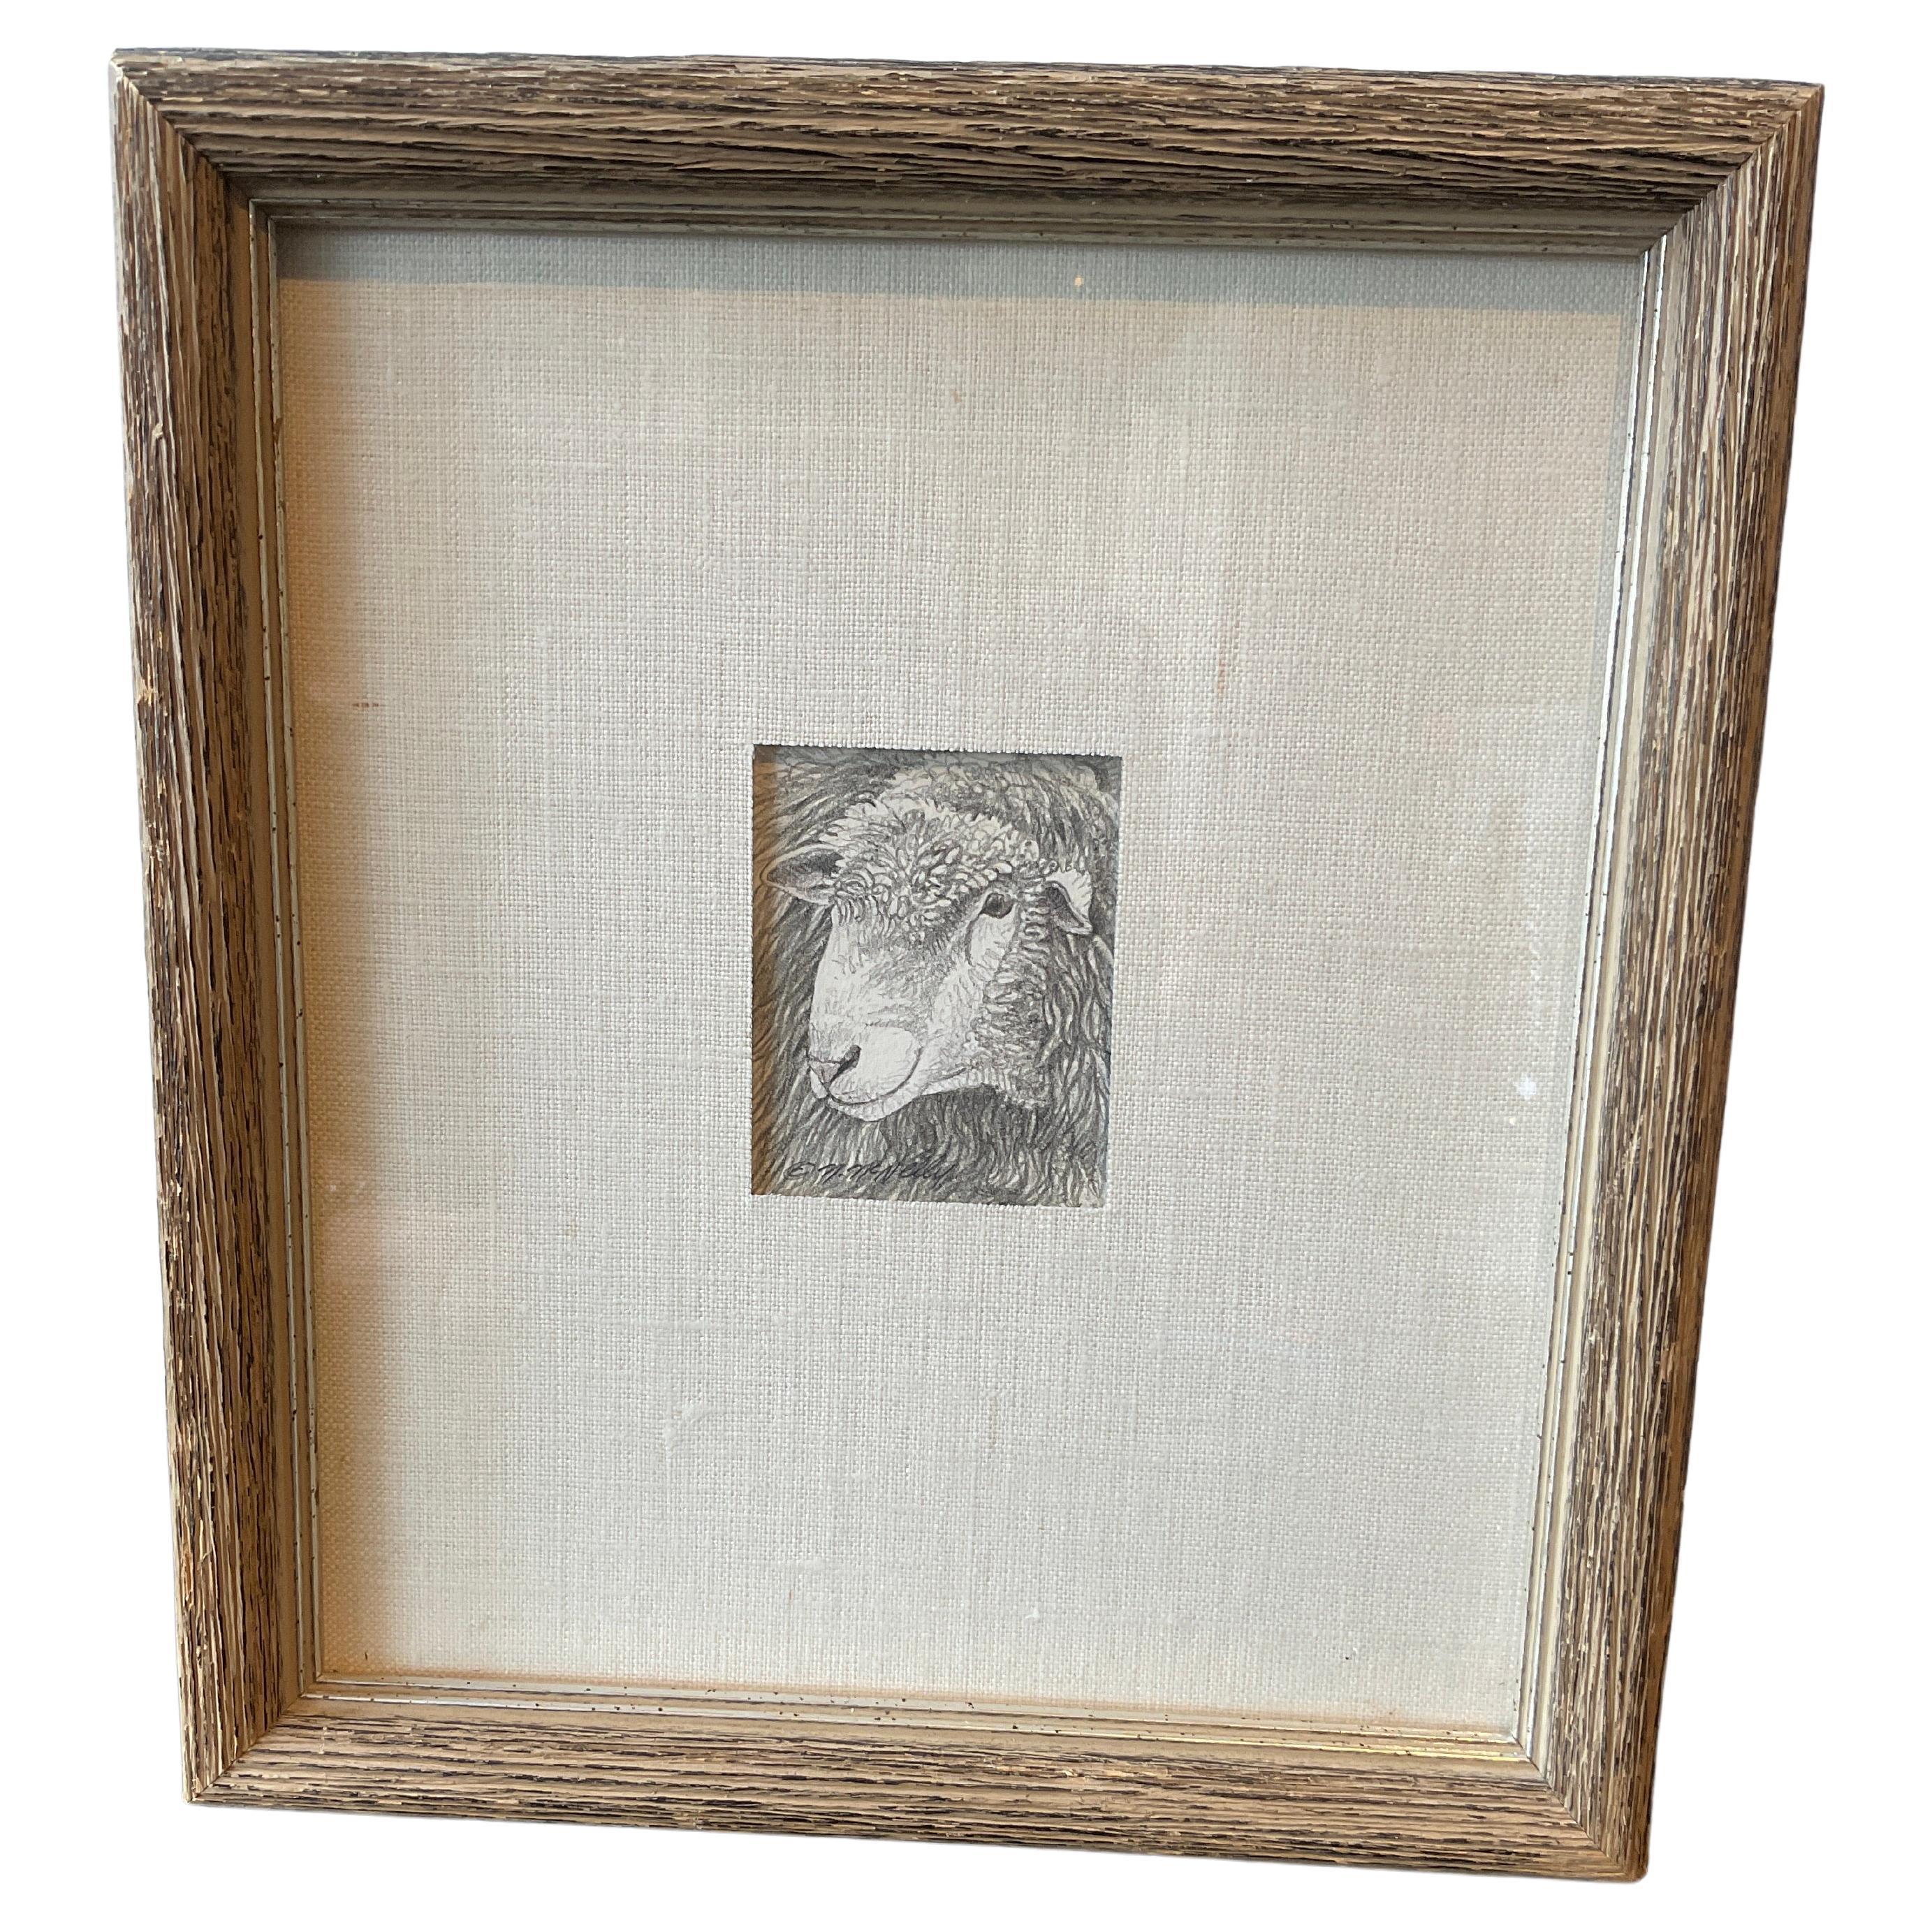 Small Pencil Drawing Of Sheep Signed McNelly